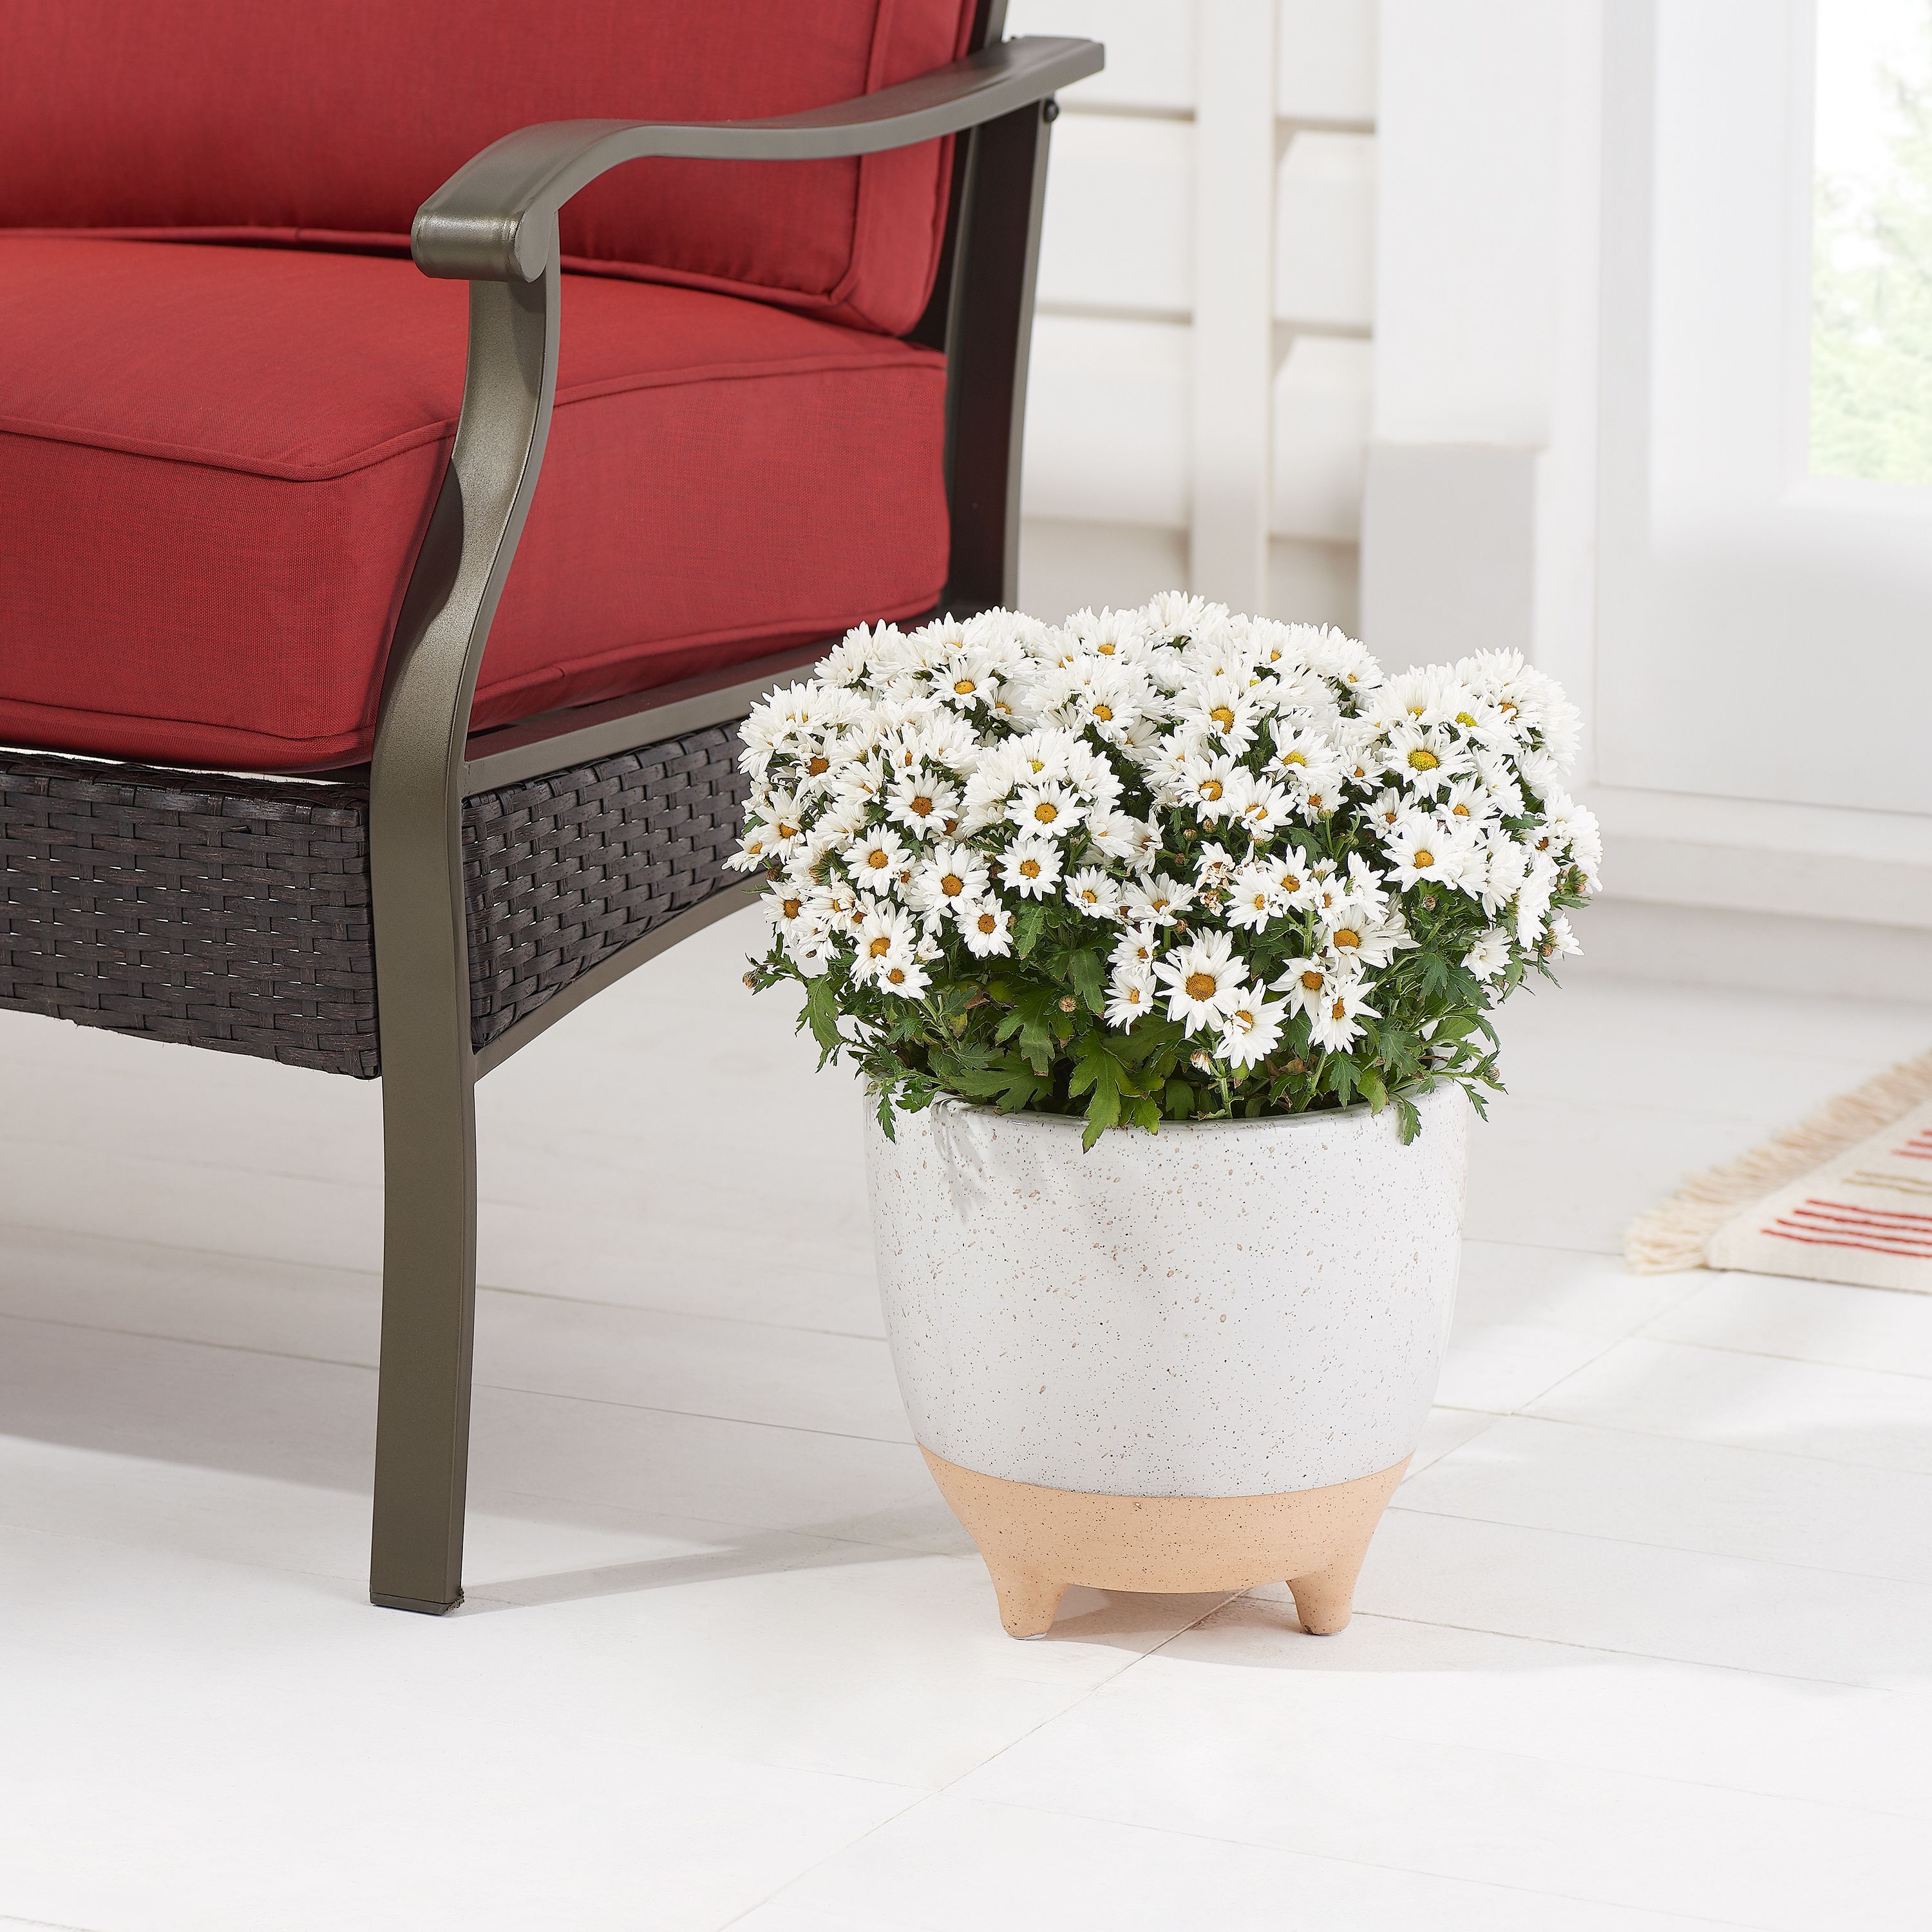 Better Homes & Gardens 10" x 10" x 9" Round White and Beige Ceramic Plant Planter - image 2 of 4